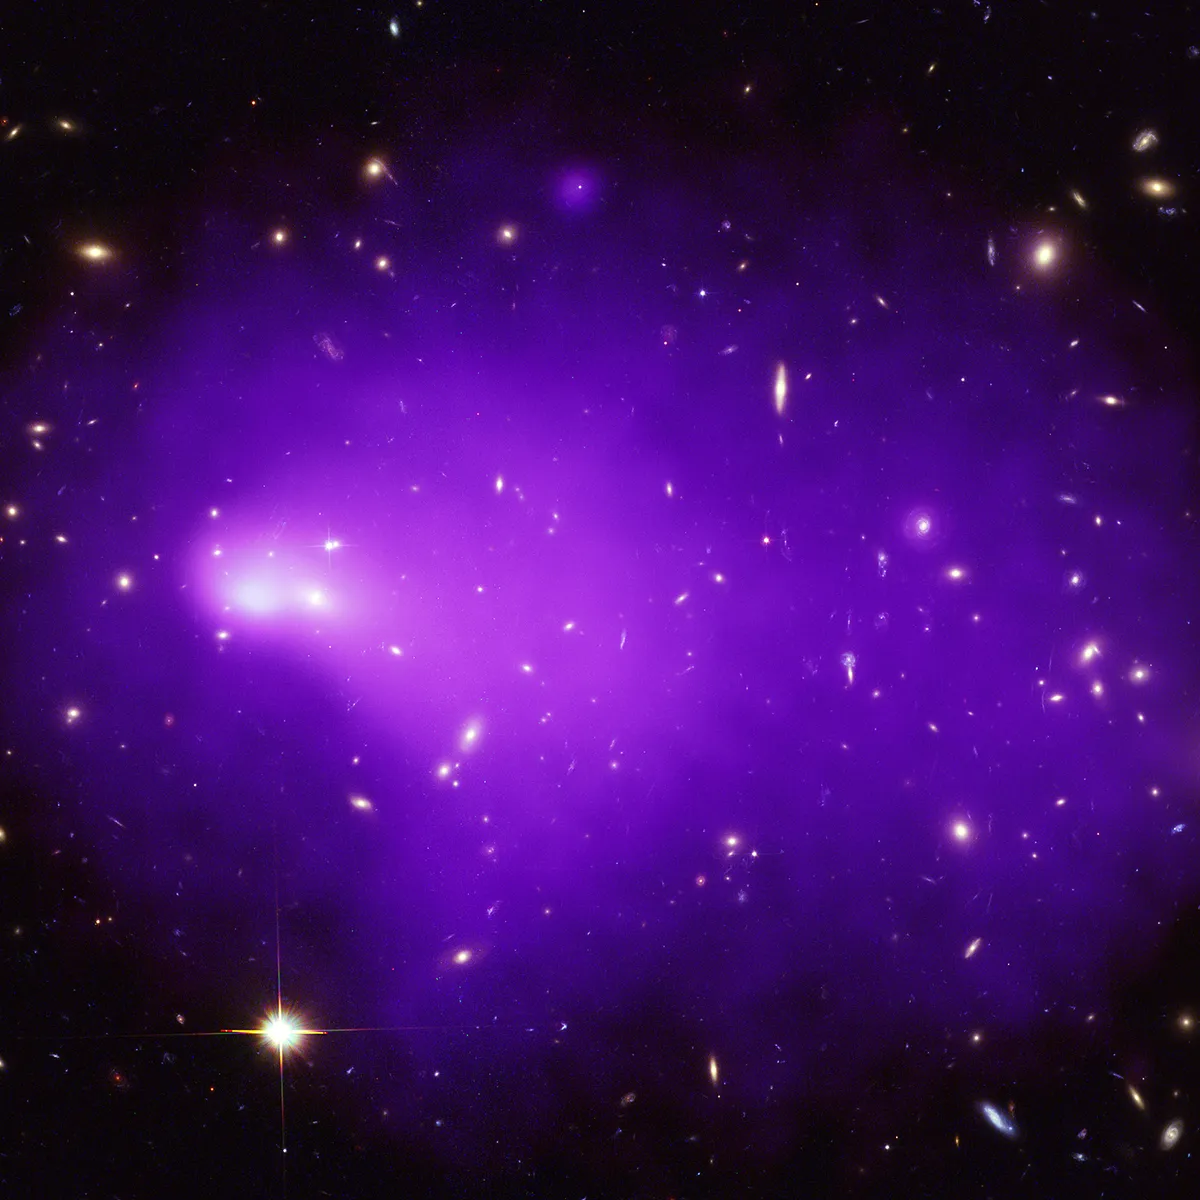 Abell 2146 This object is the result of a merger of two galaxy clusters. Galaxy clusters are the largest structures in the Universe held together by gravity, and it's thought that these objects grow so big through collisions. Credit: X-ray: NASA/CXC/Univ of Waterloo/H. Russell et al.; Optical: NASA/STScI